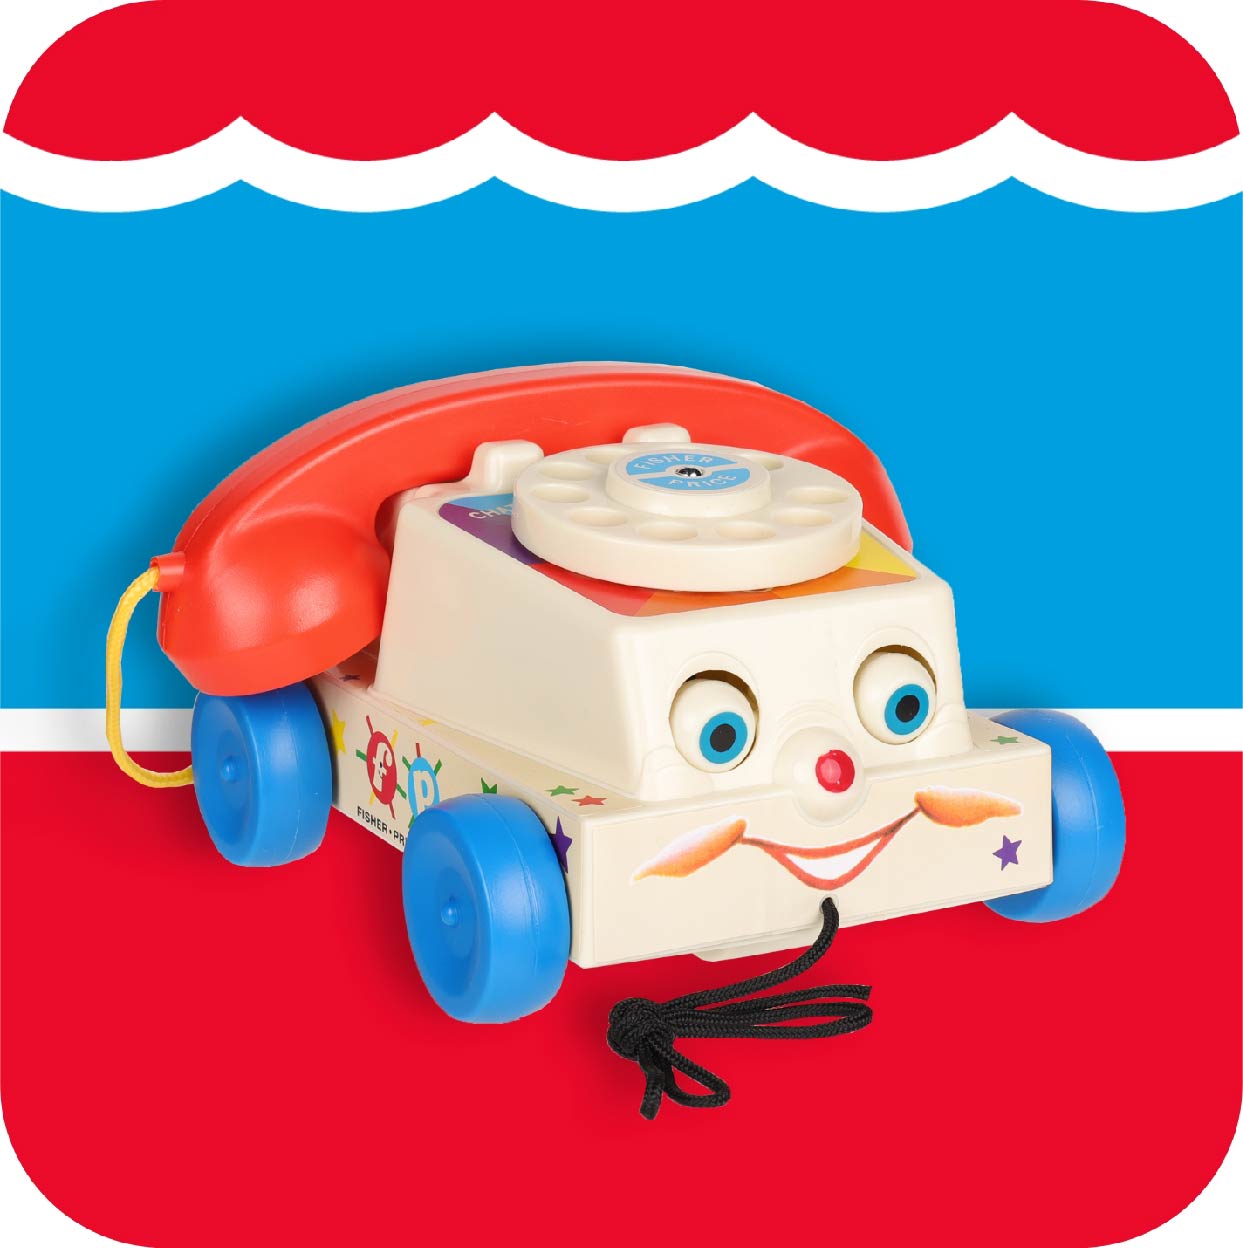 Fisher Price chatter phone